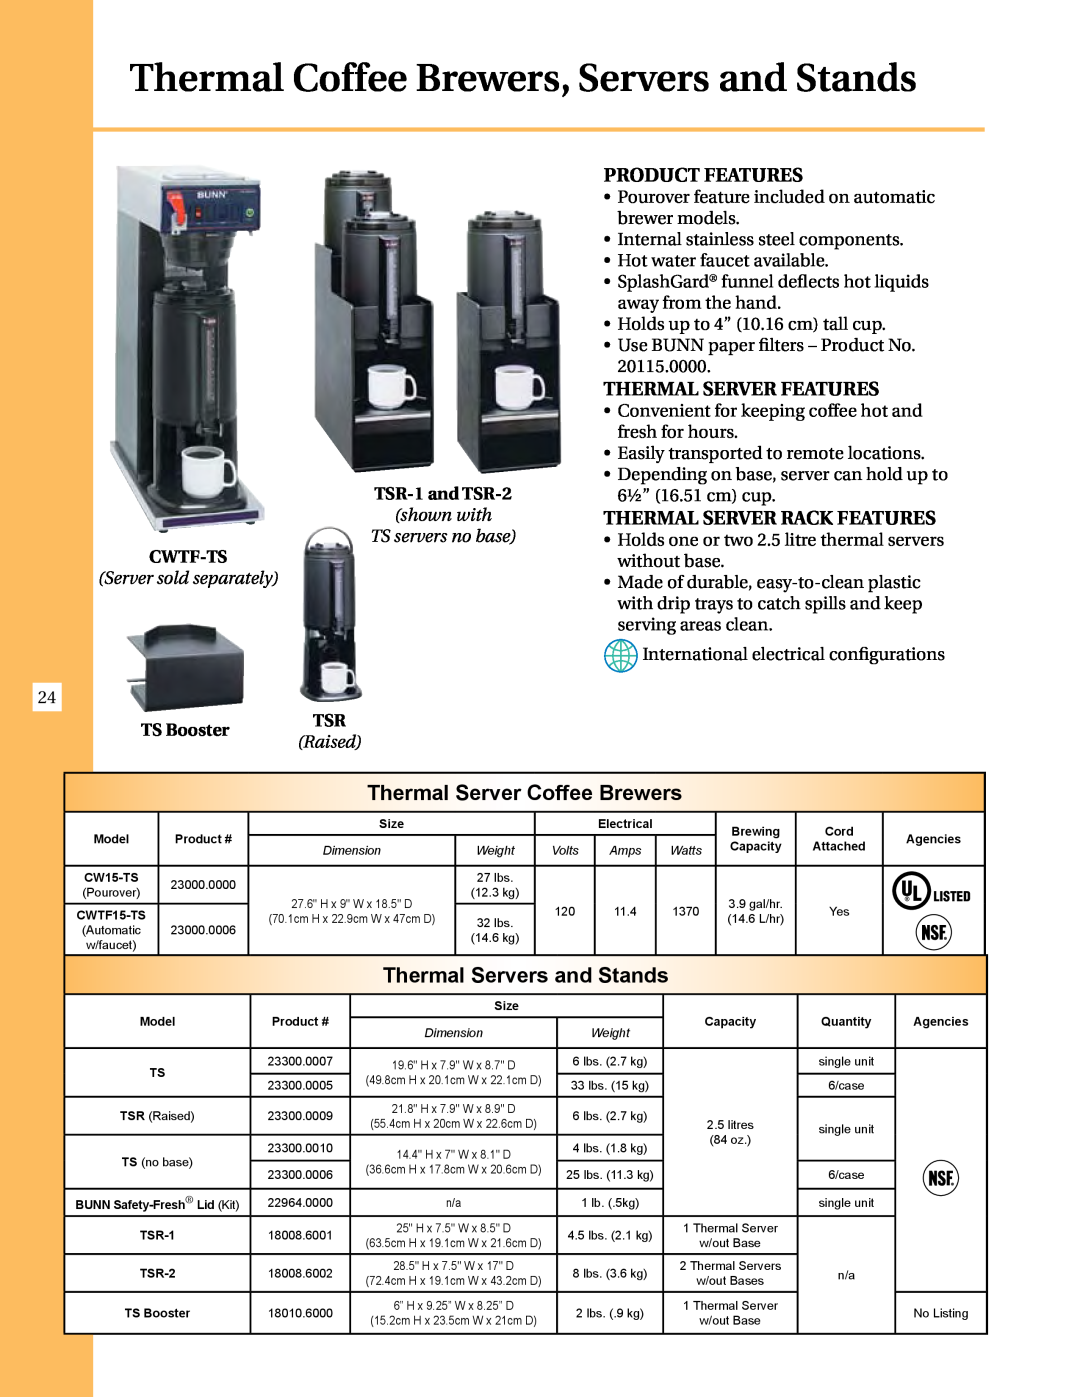 Thermal Comfort ICB-TWIN Thermal Coffee Brewers, Servers and Stands, Product Features, Thermal Server Features, Cwtf-Ts 